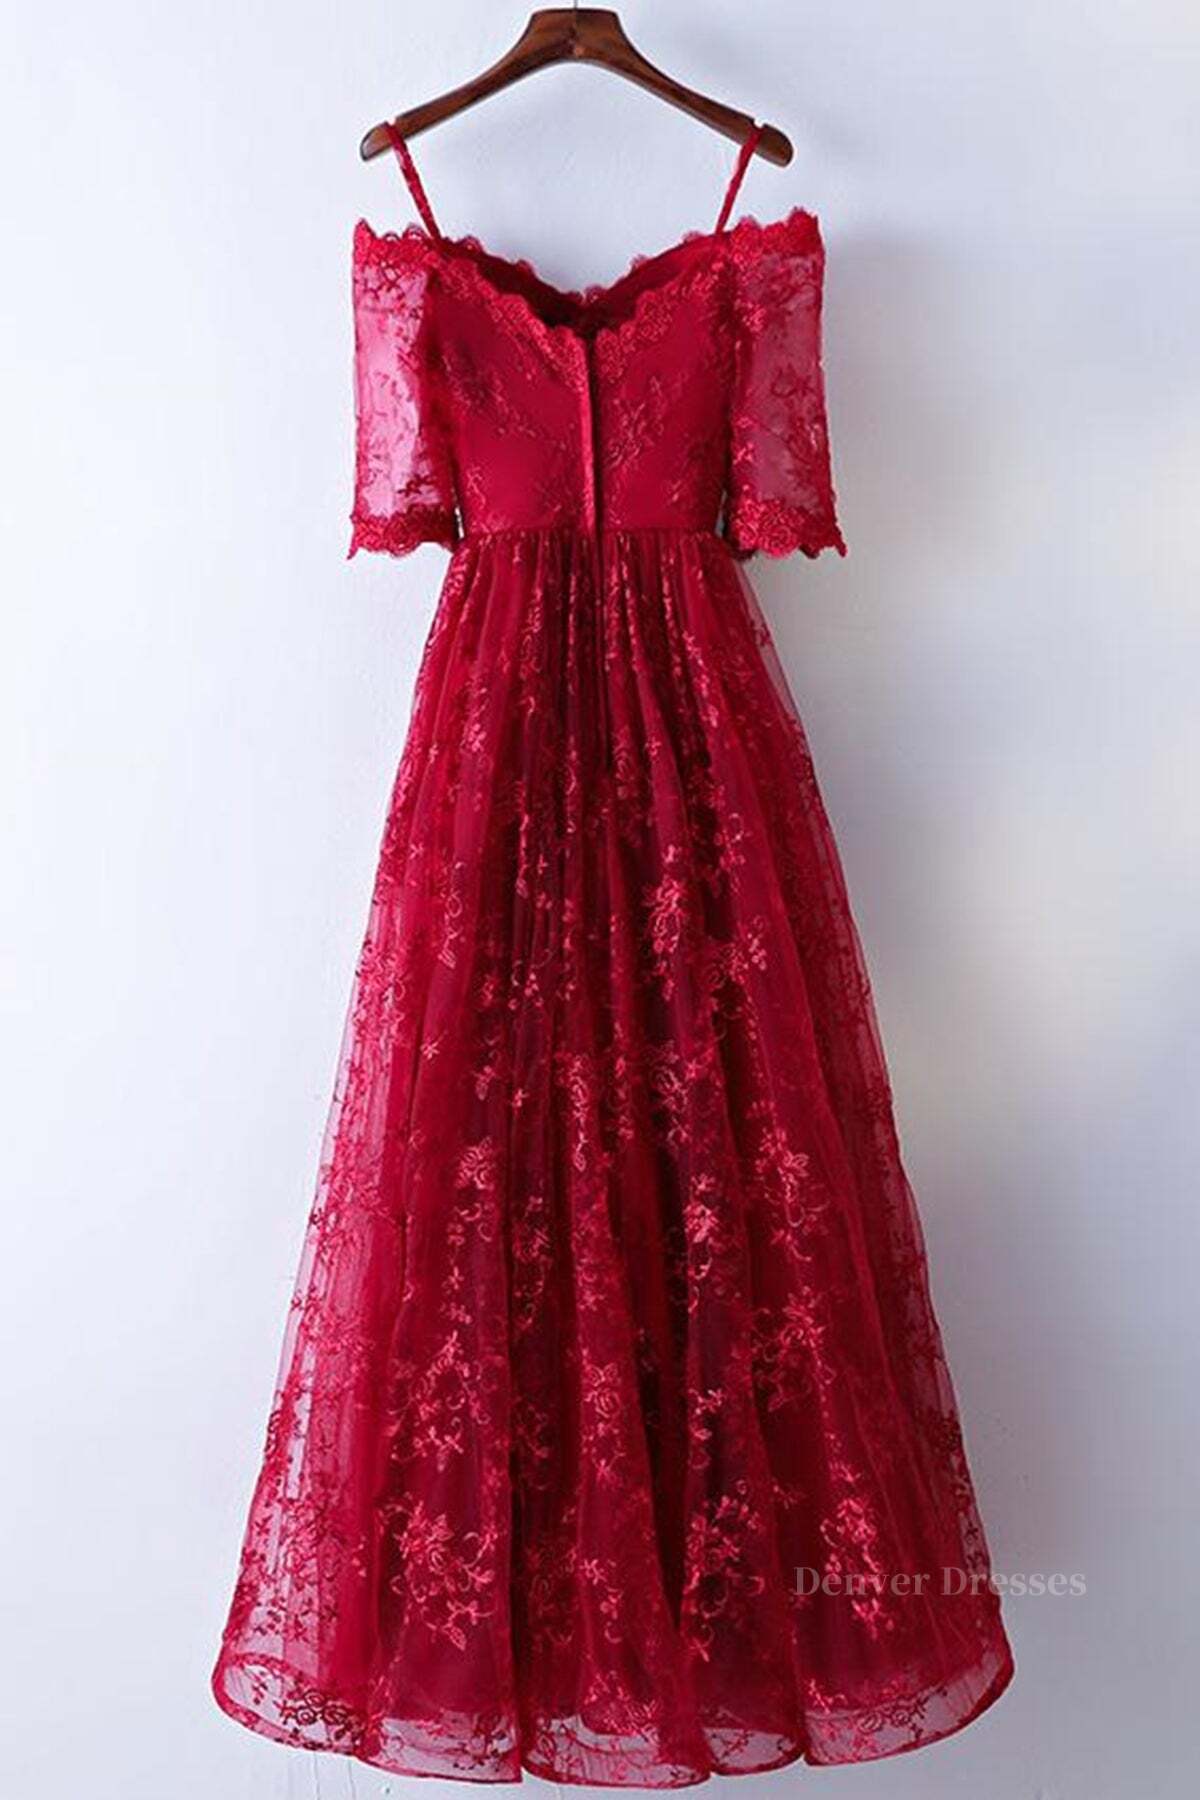 Evening Dress Boutique, Half Sleeves Burgundy Lace Prom Dresses, Wine Red Half Sleeves Long Lace Formal Evening Dresses